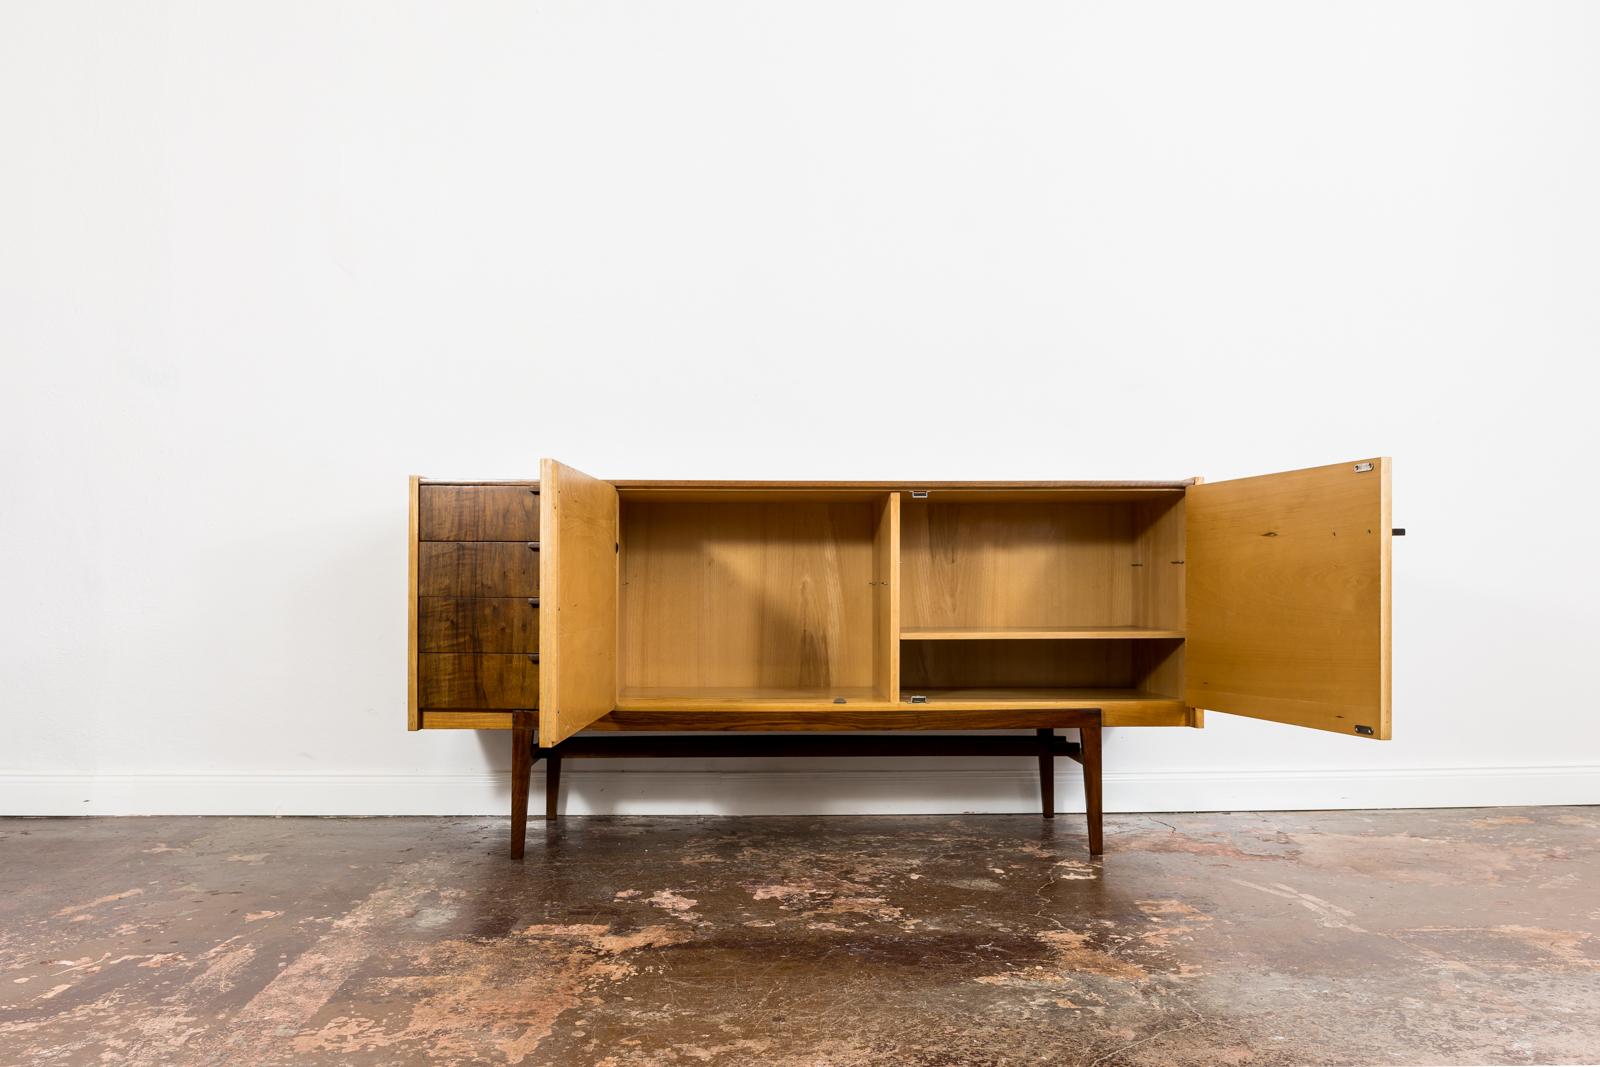 Sideboard designed by František Mezuláník for Up Závody, Czechoslovakia, 1960s
This item has been restored and refinished enhancing unique contrasting colors of walnut and ash veneer.